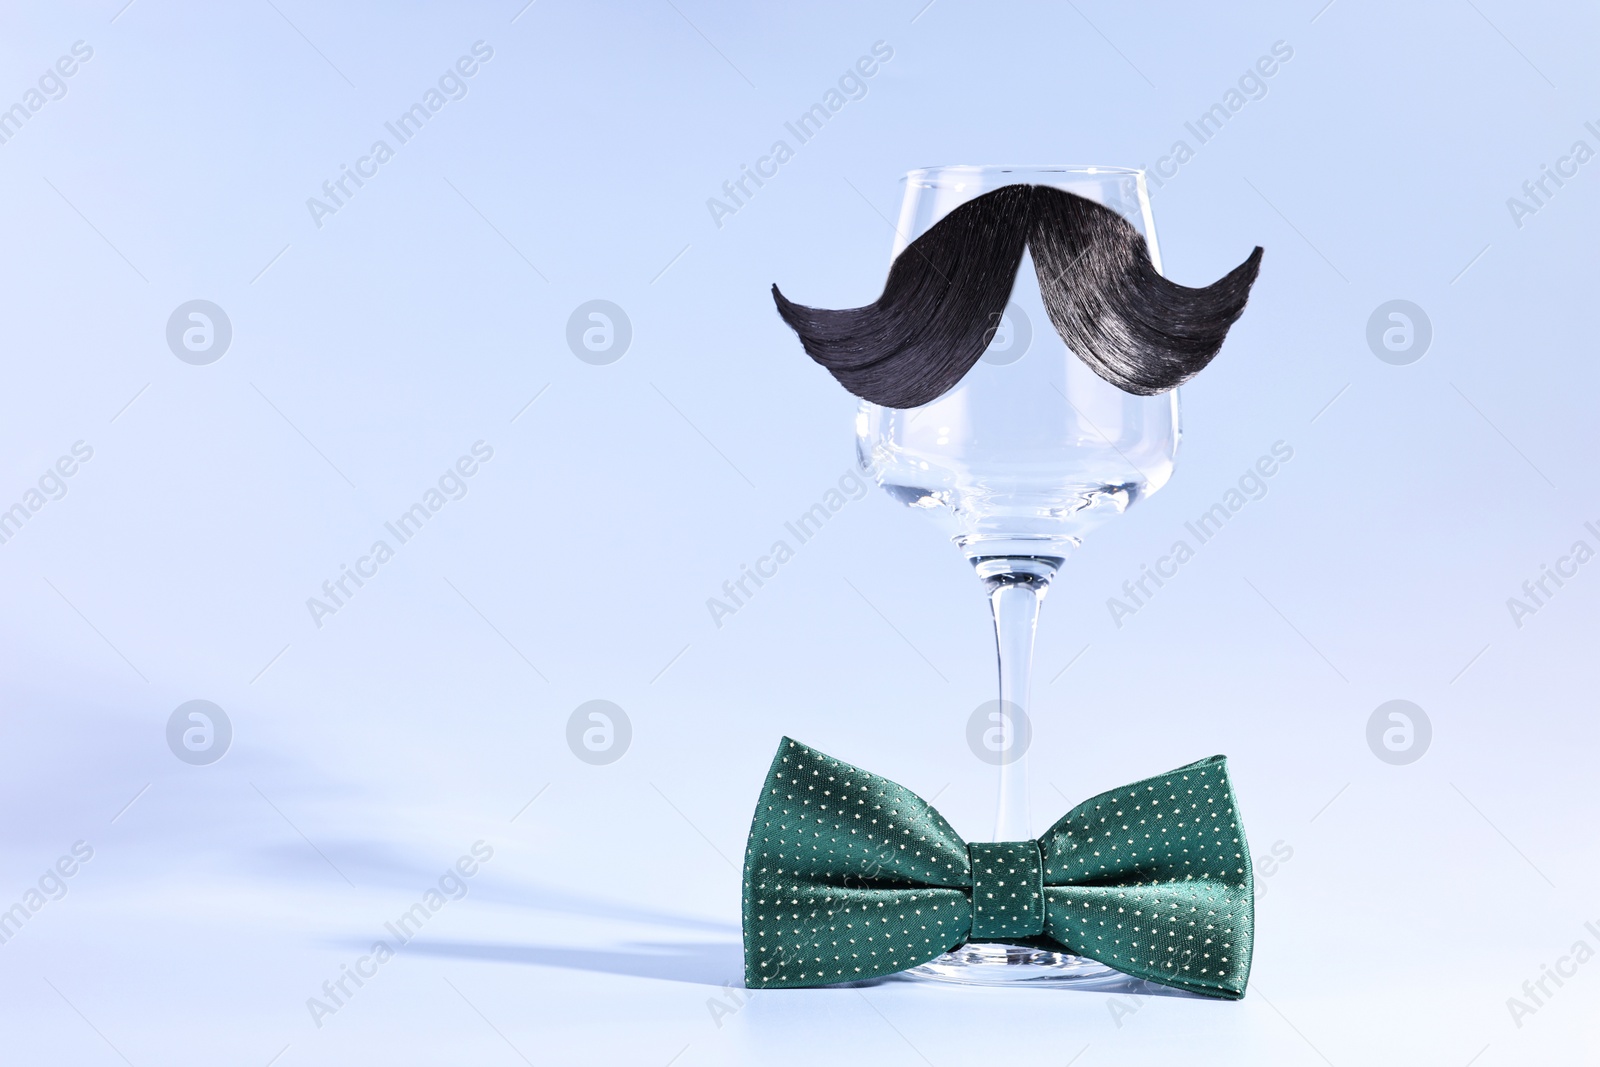 Photo of Man's face made of artificial mustache, bow tie and wine glass on light blue background. Space for text